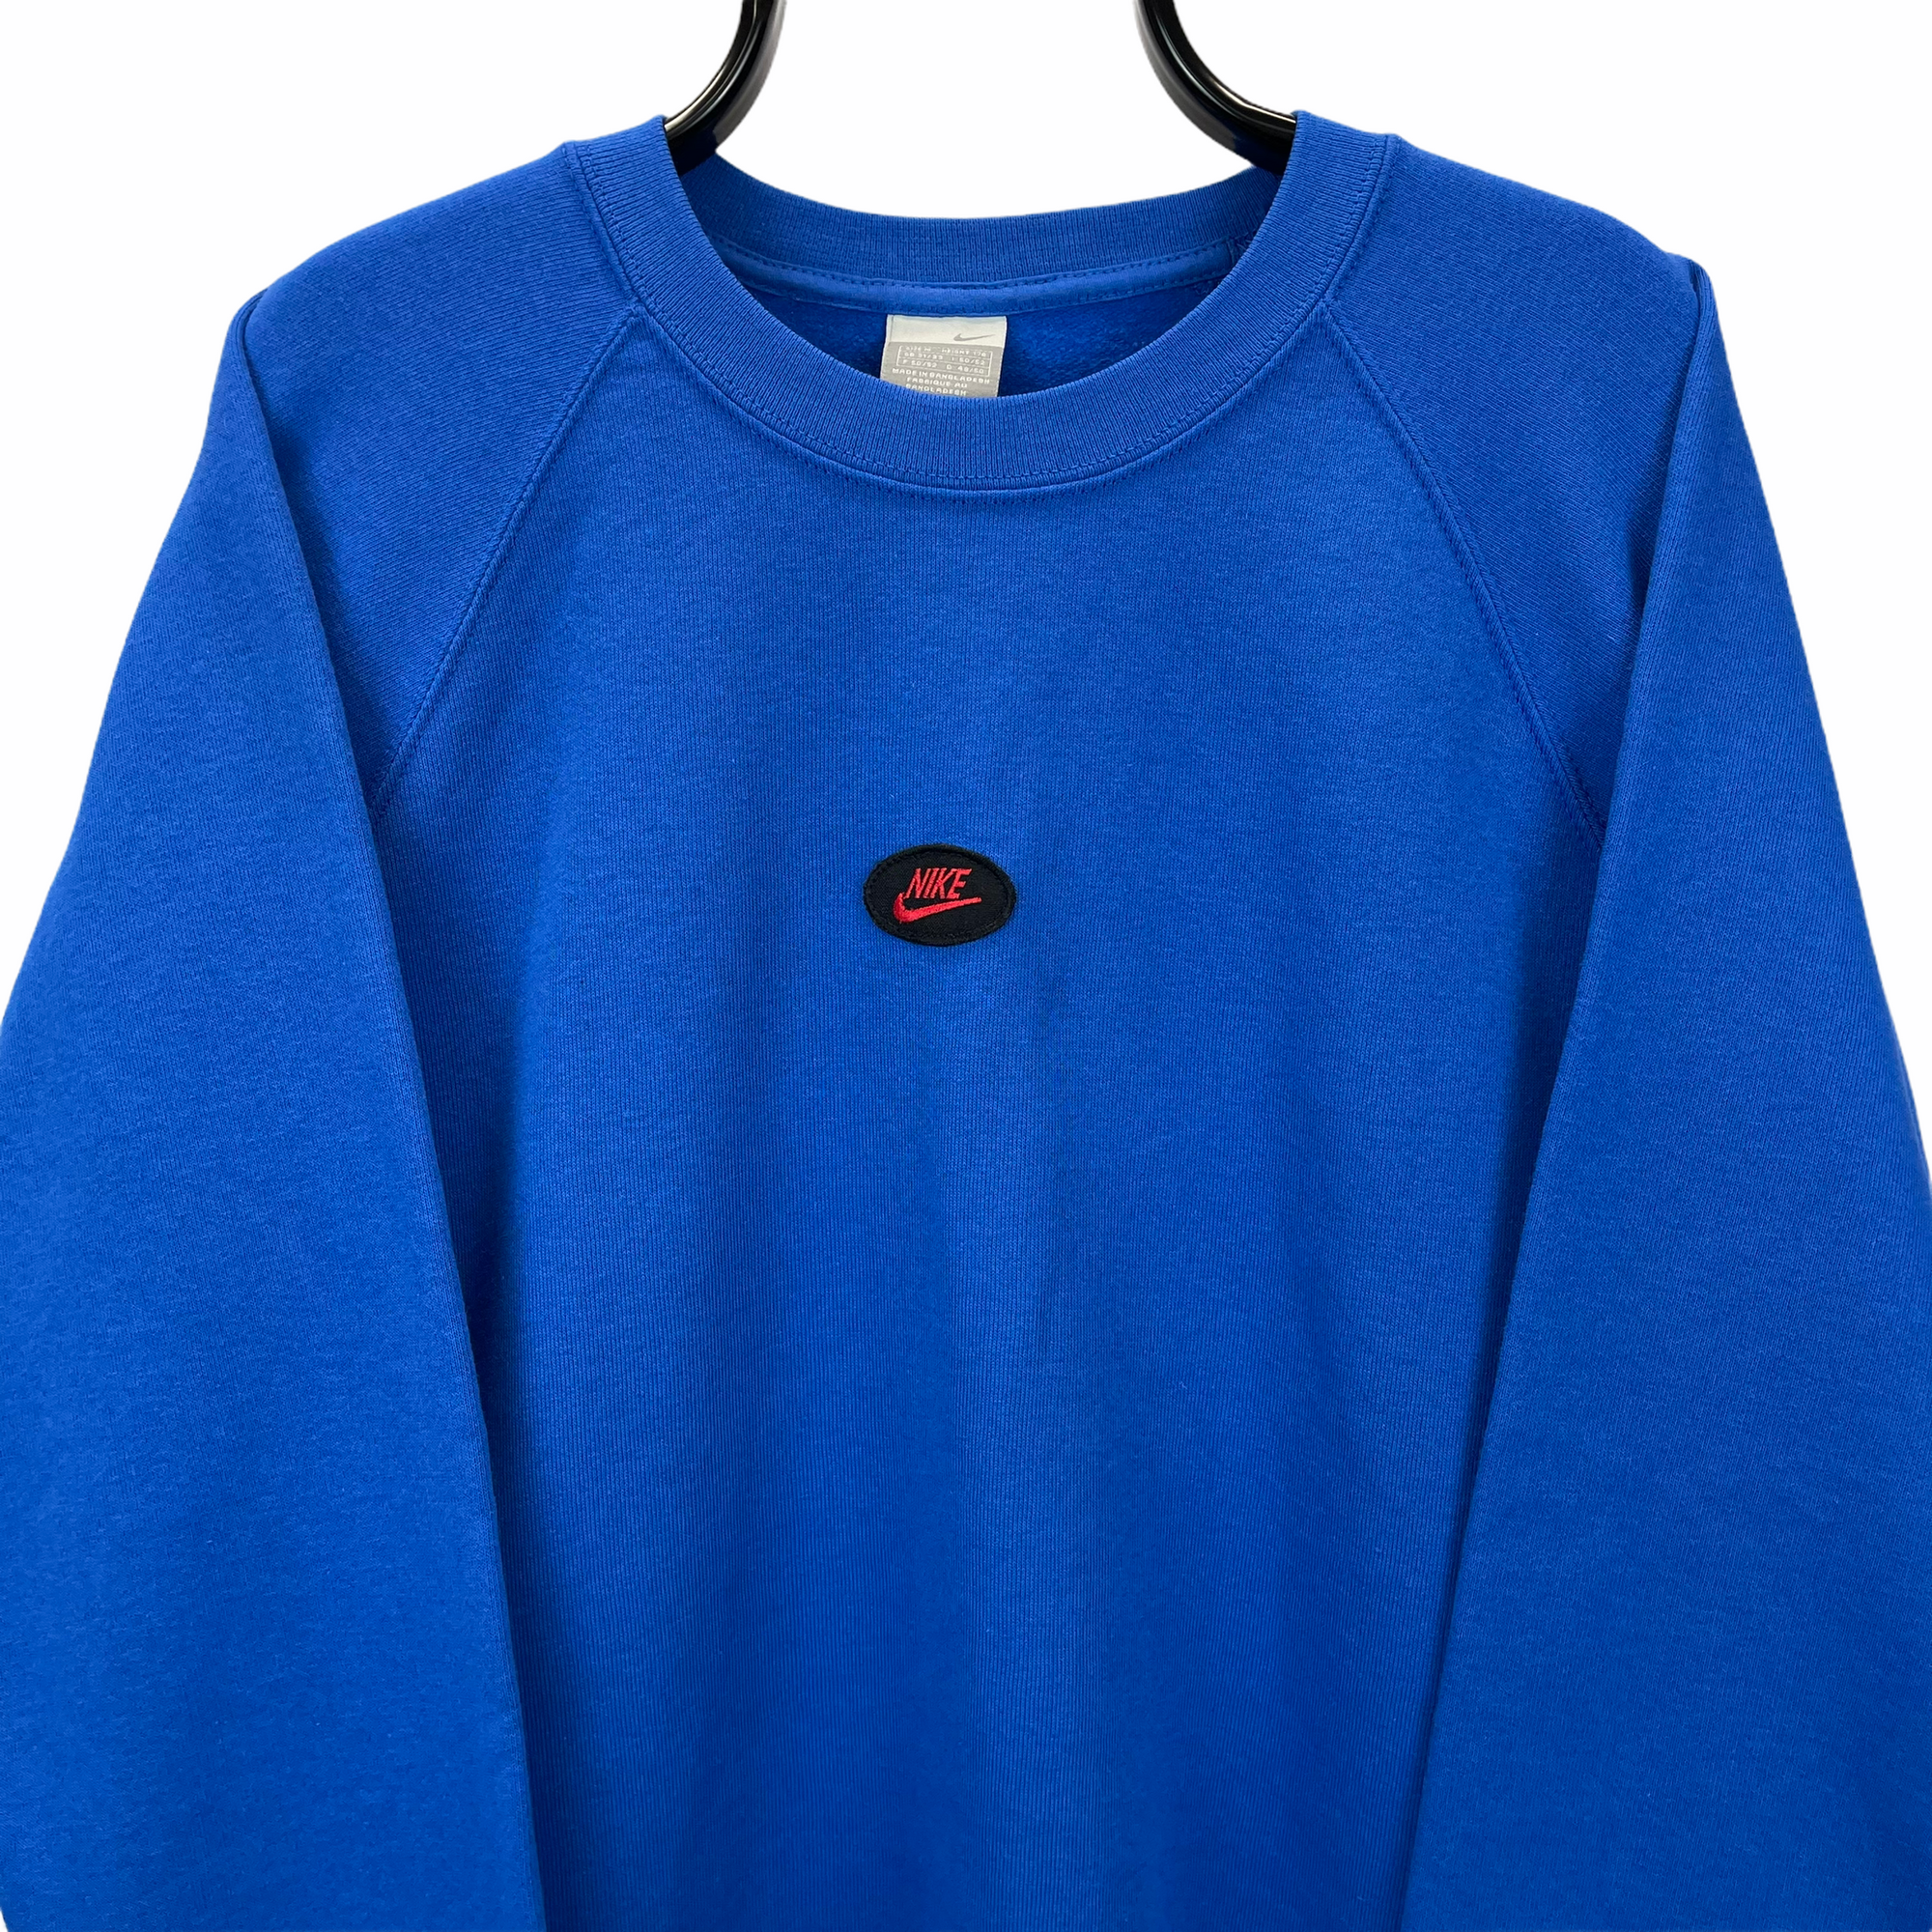 VINTAGE NIKE EMBROIDERED SMALL SPELLOUT SWEATSHIRT IN BLUE - MEN'S LARGE/WOMEN'S XL